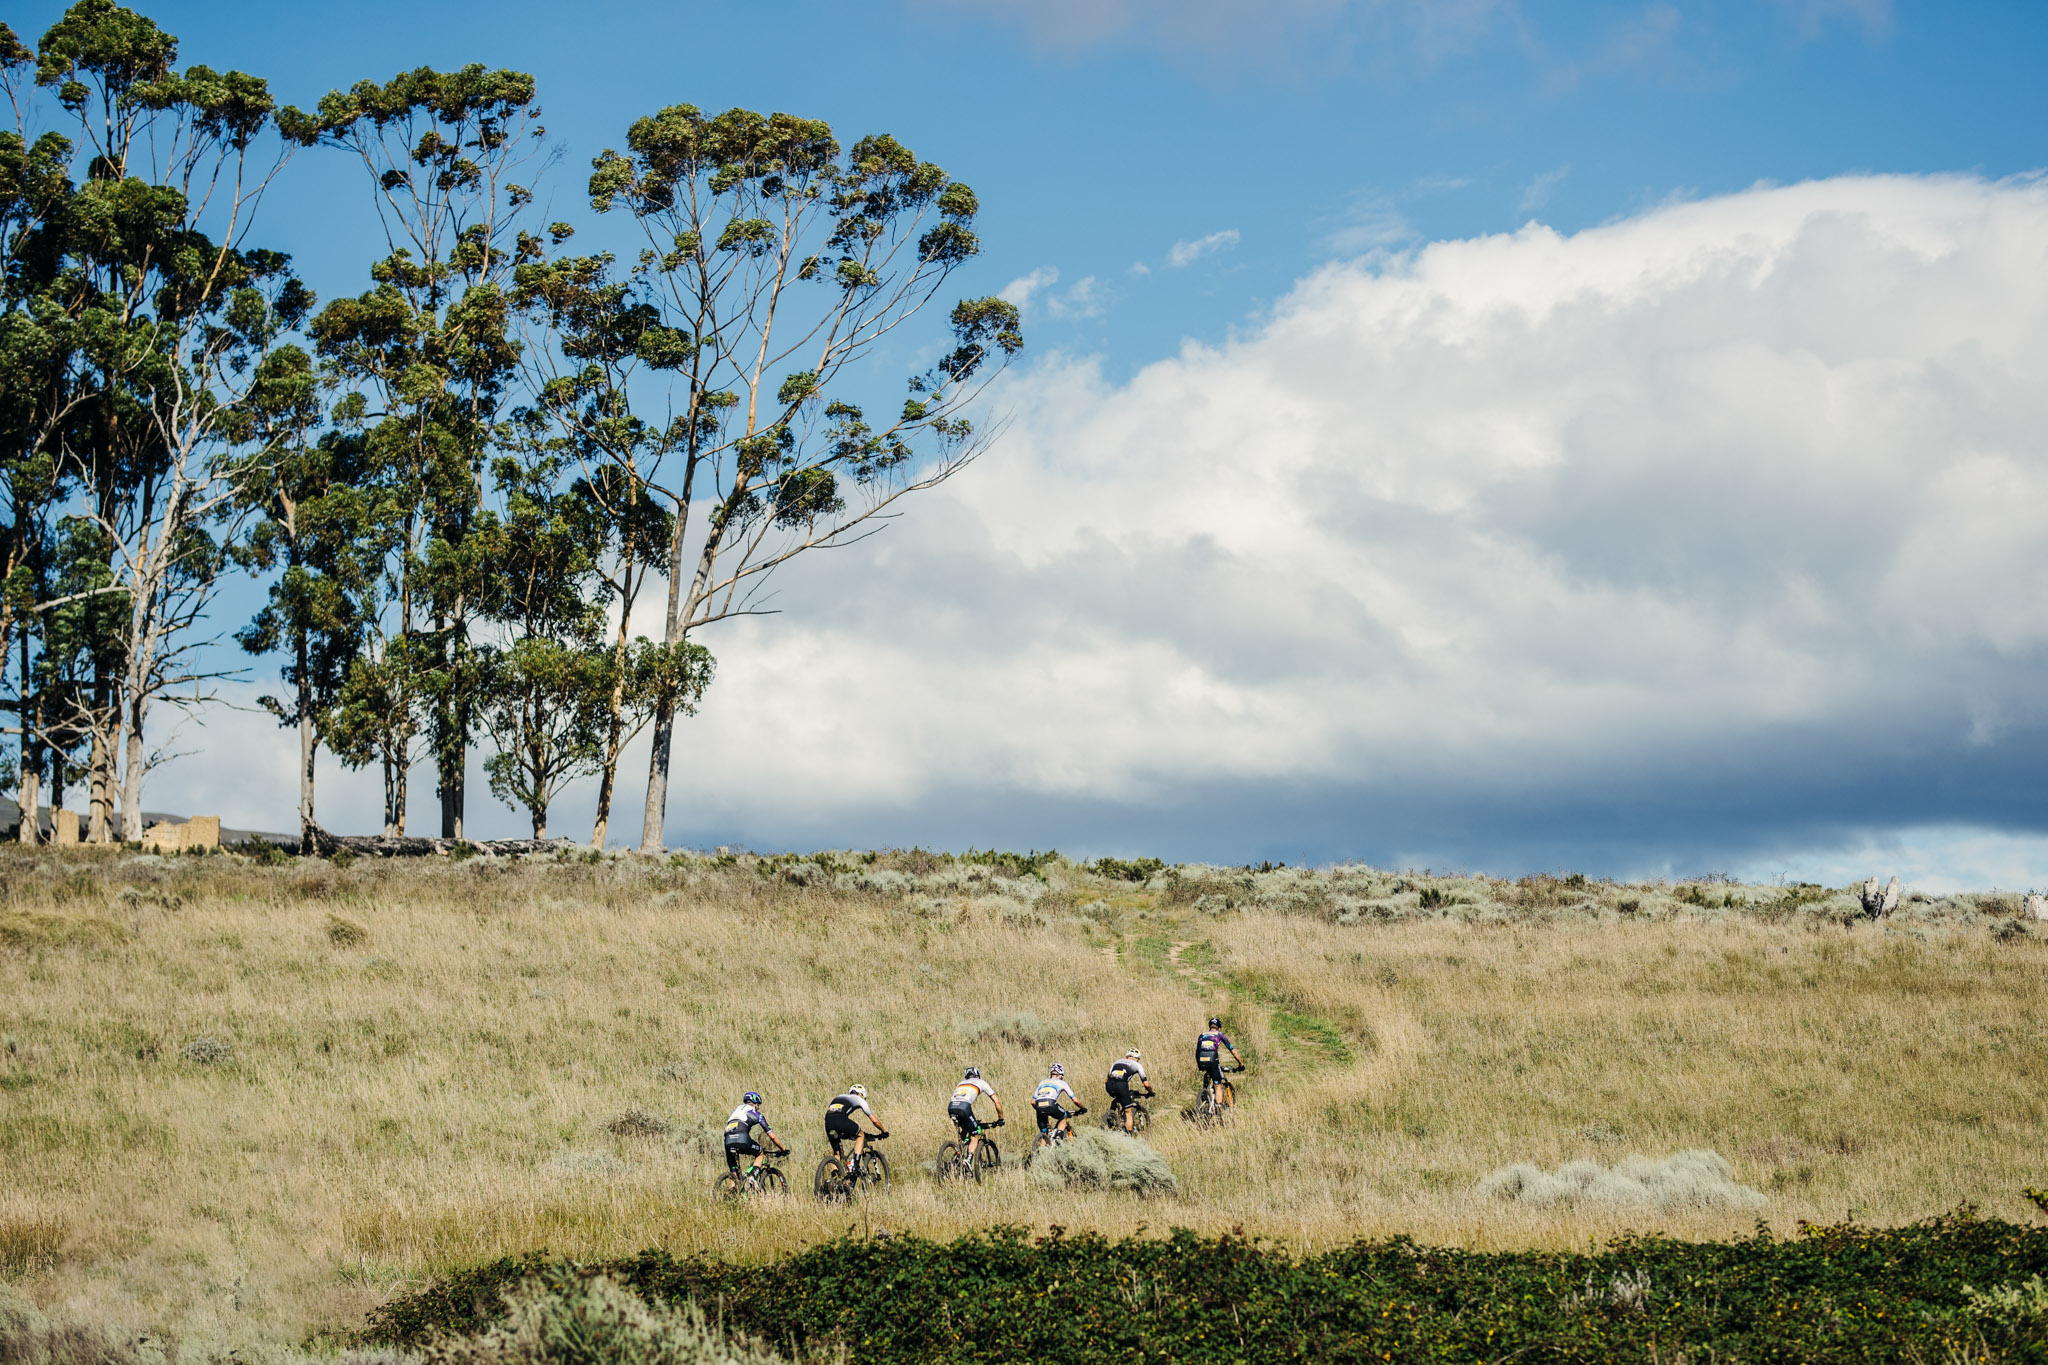 A grassy field with a row of cyclists riding single file through it